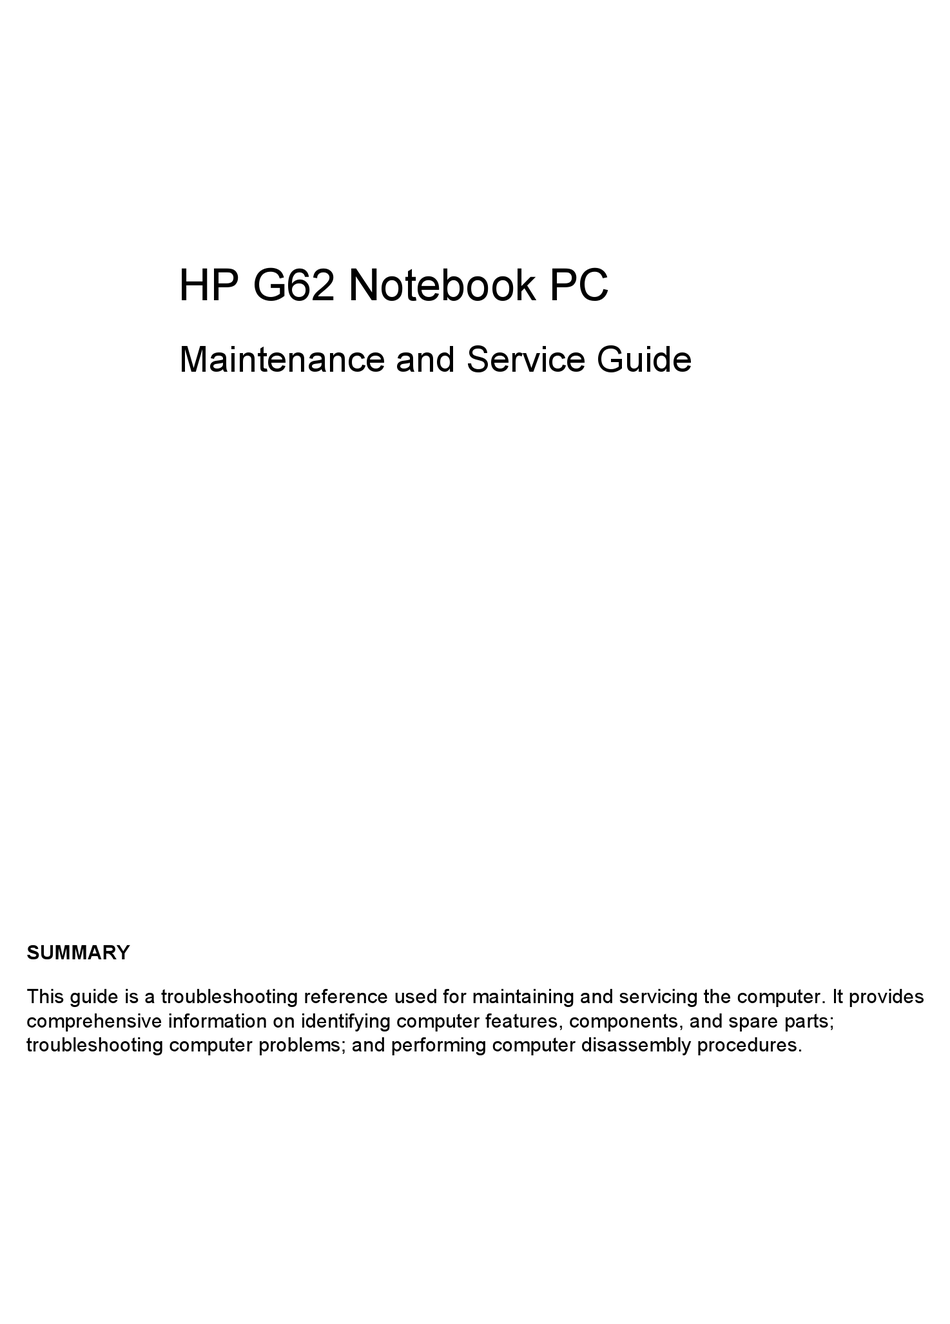 download microphone driver for hp g62